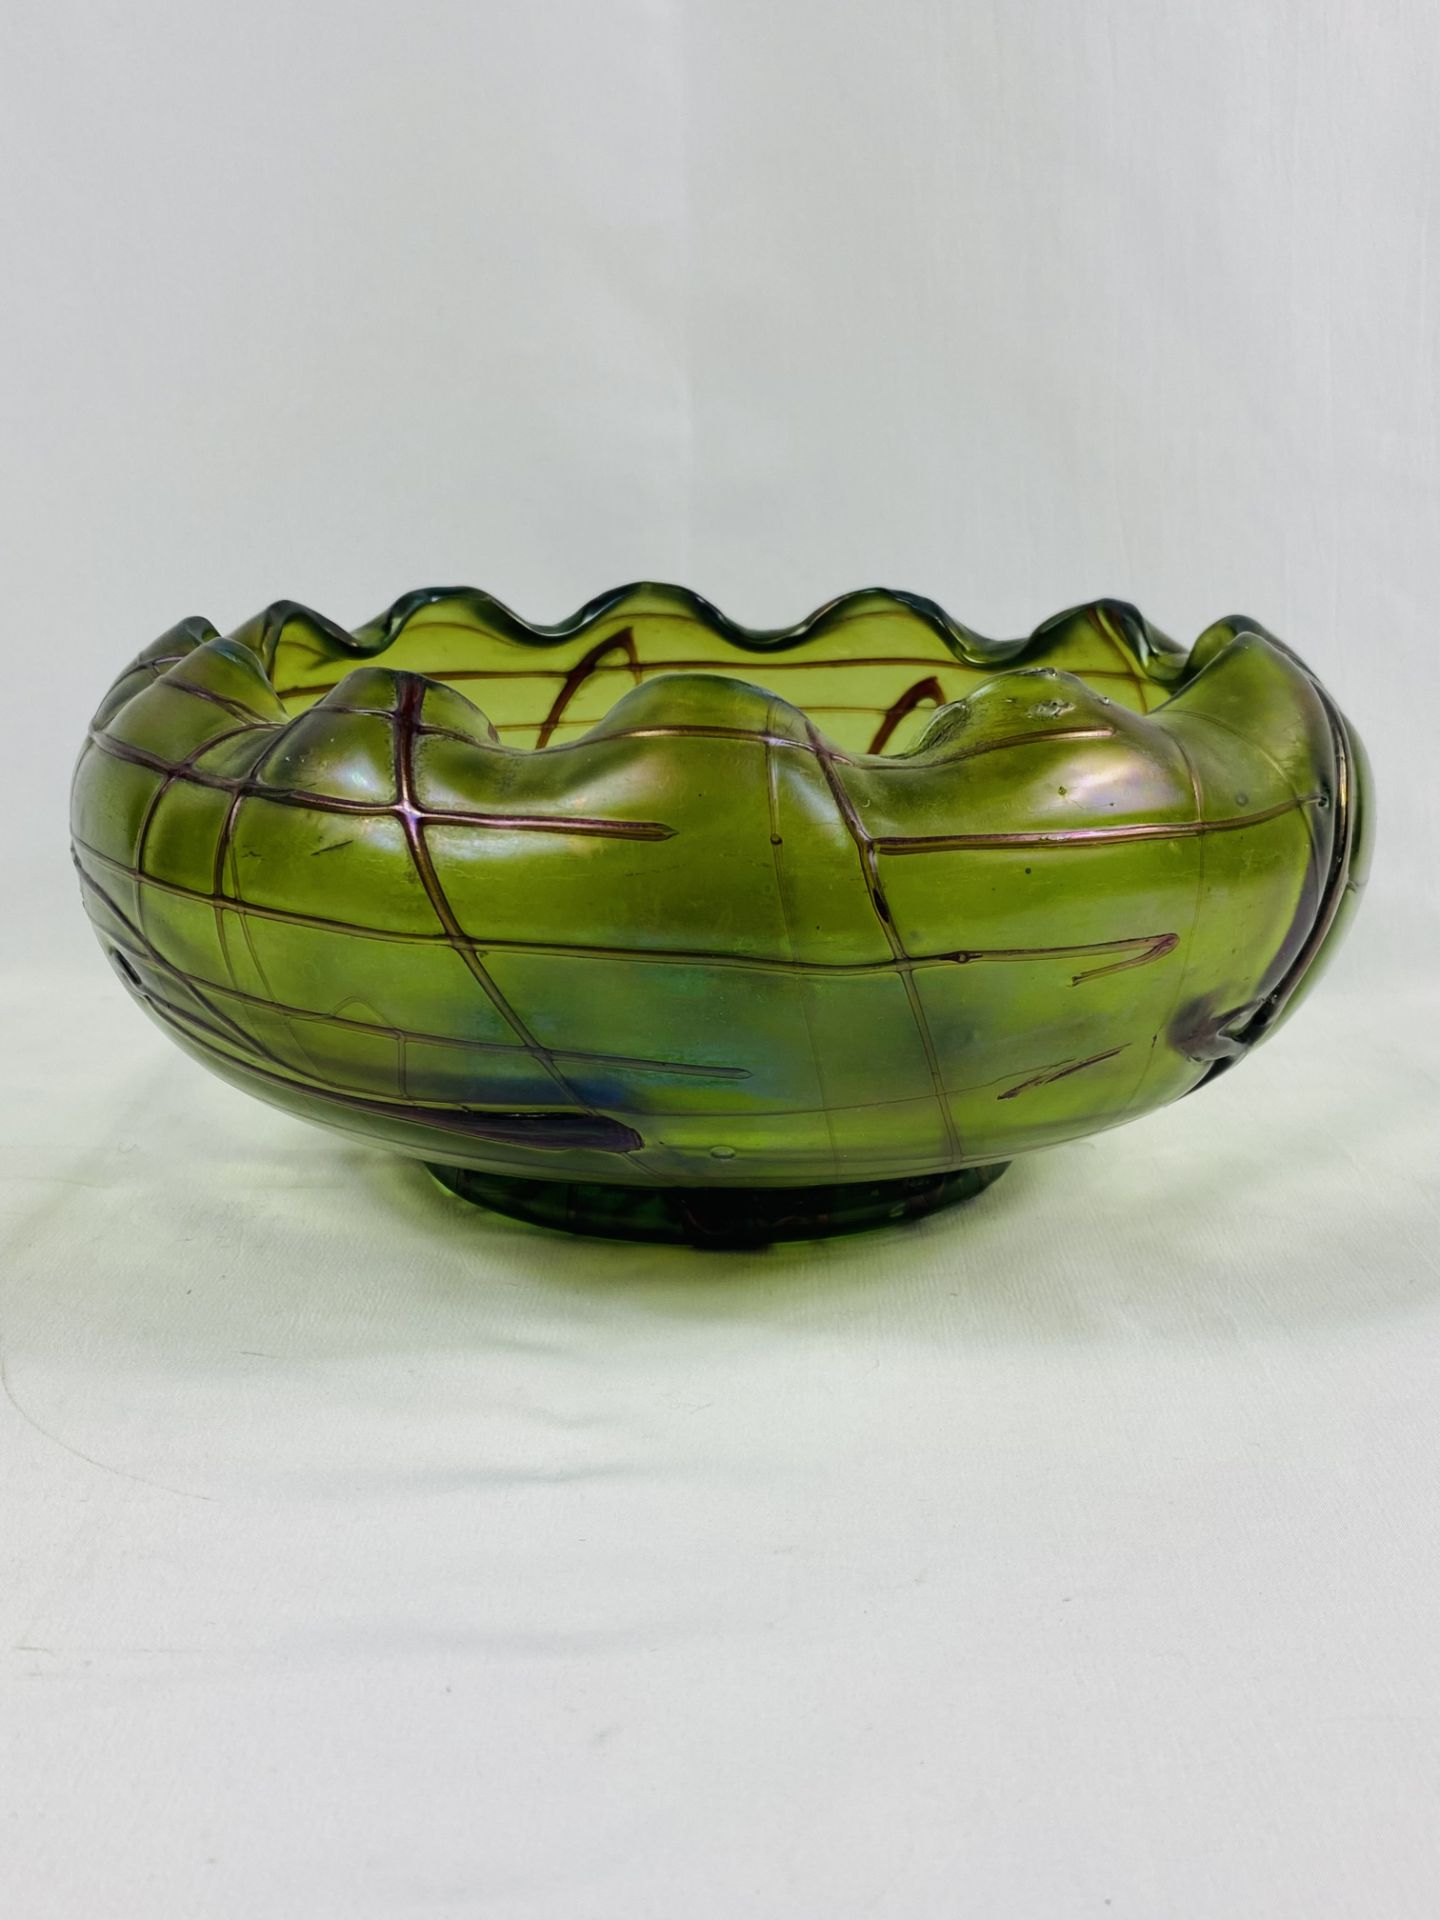 Green glass sgraffito style bowl with scalloped rim - Image 3 of 7